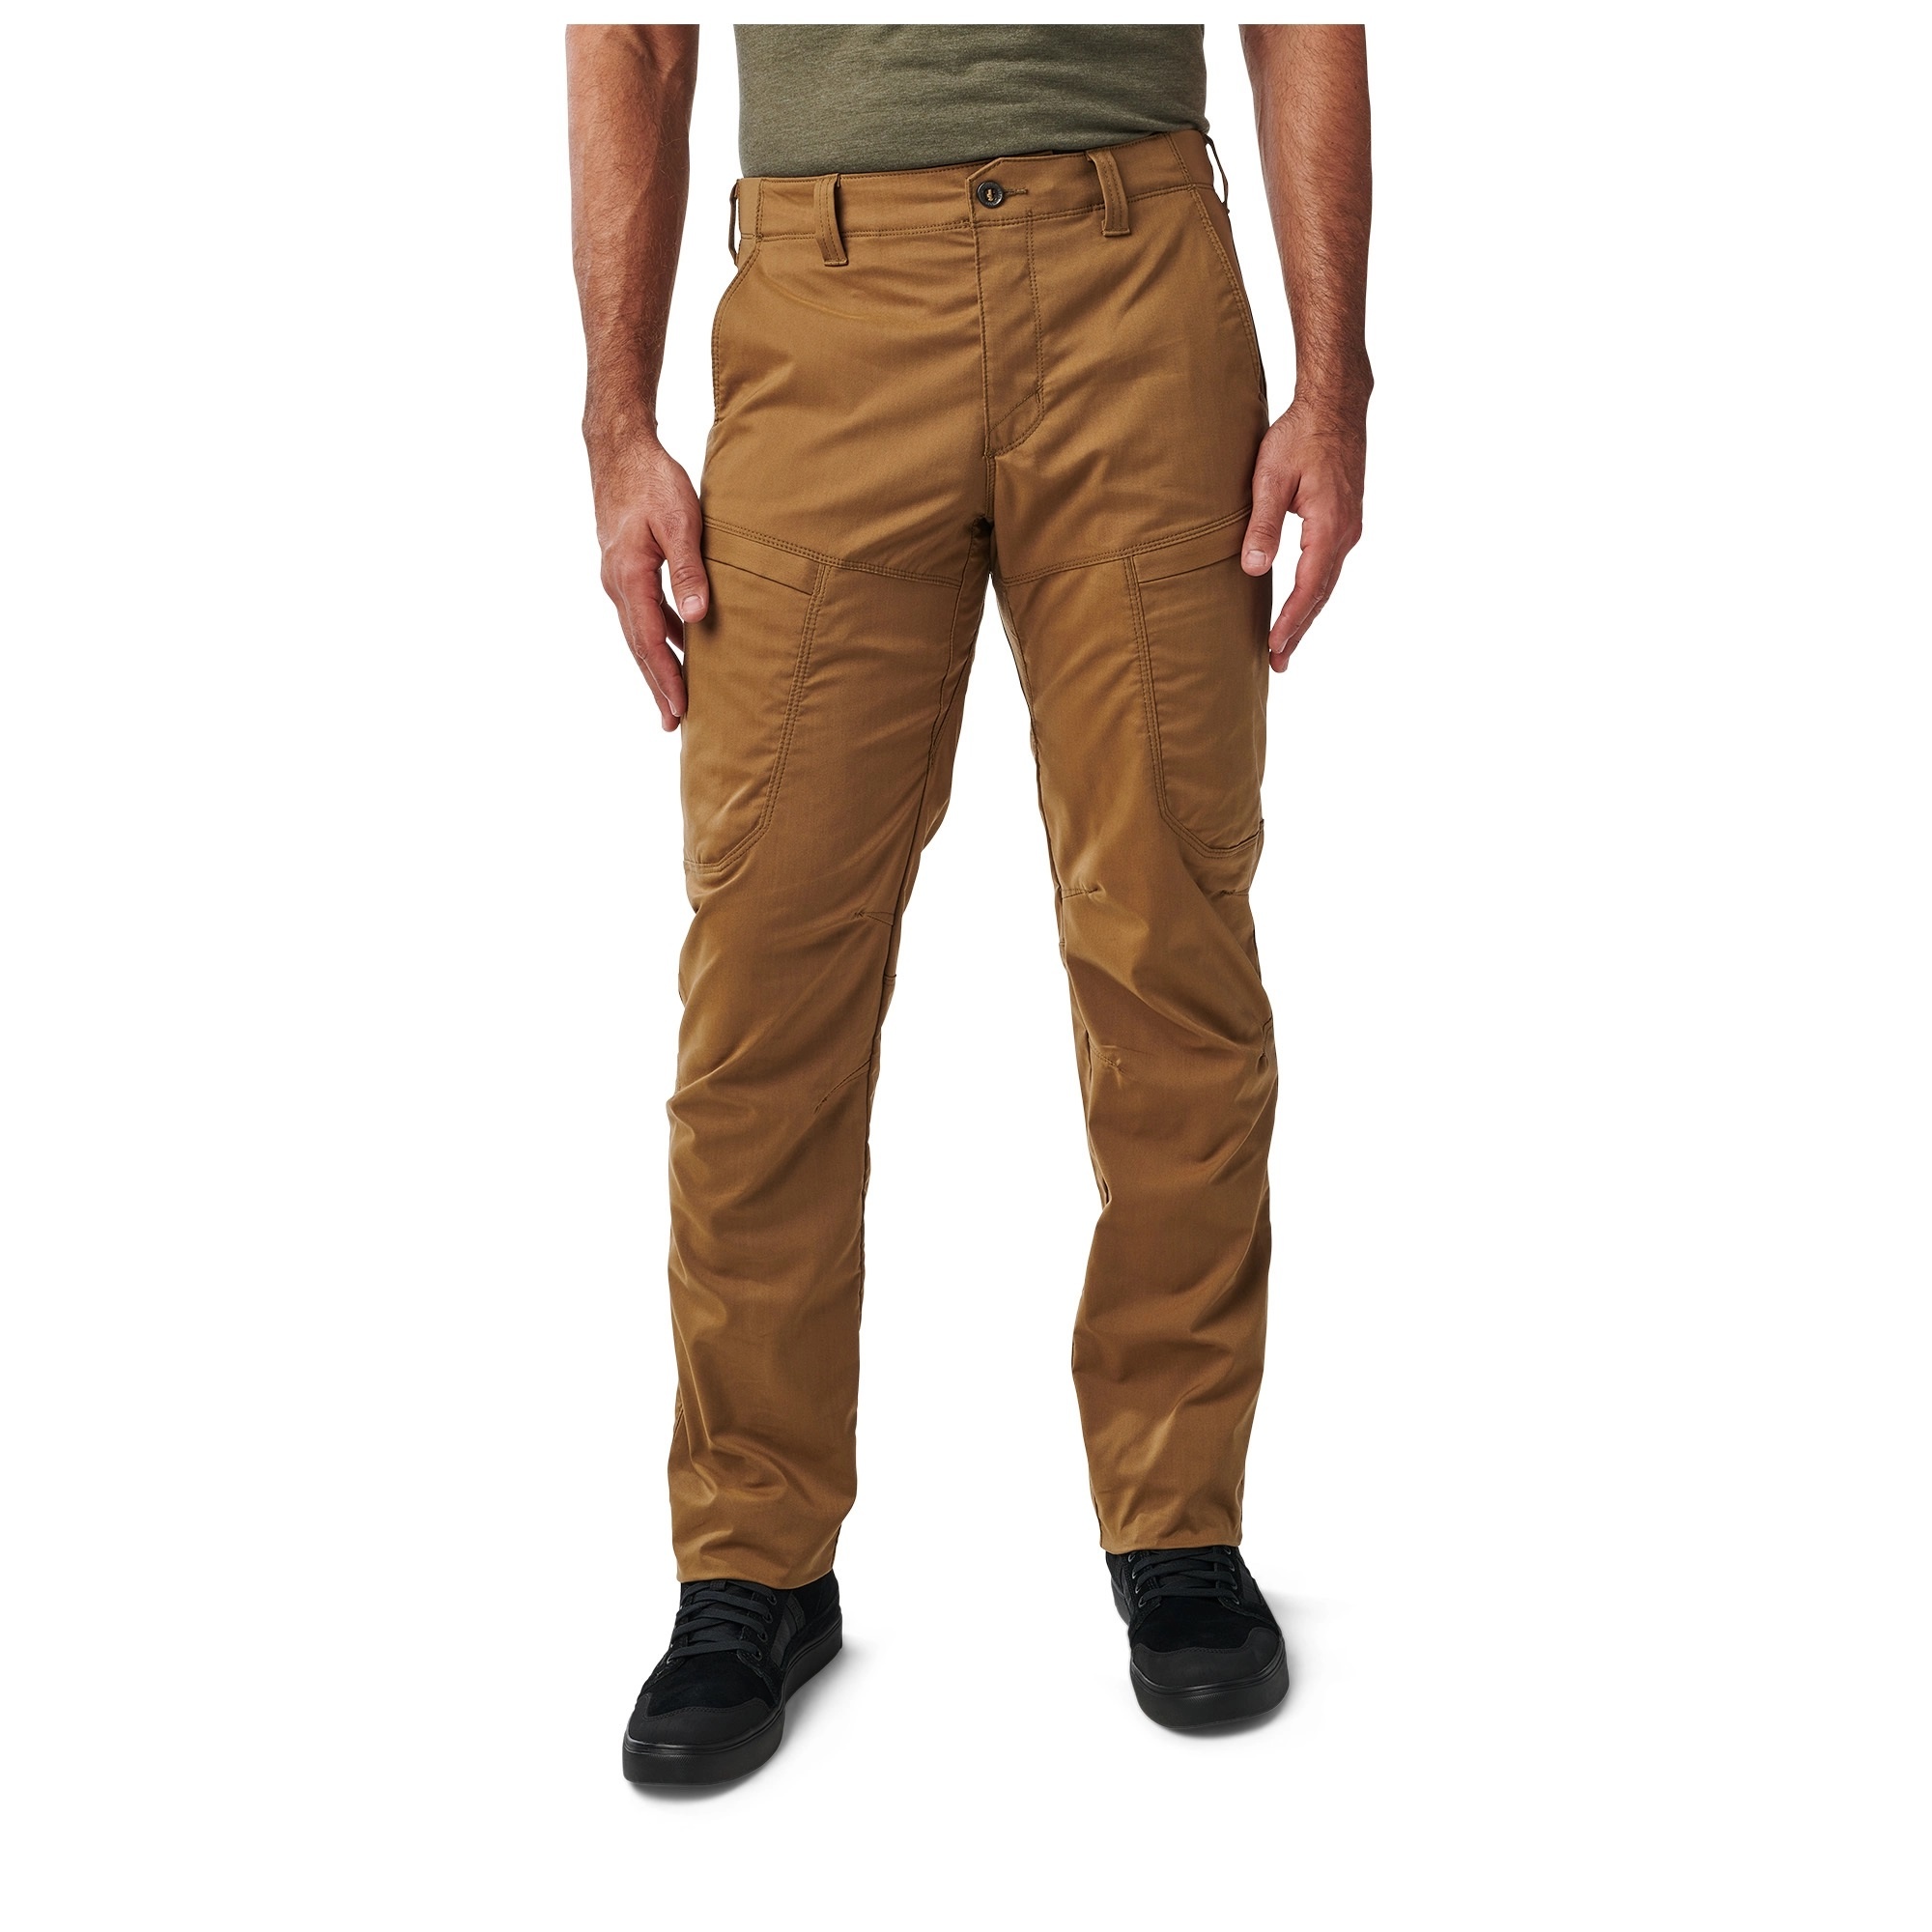 5.11 Tactical Icon Pant Ranger Green